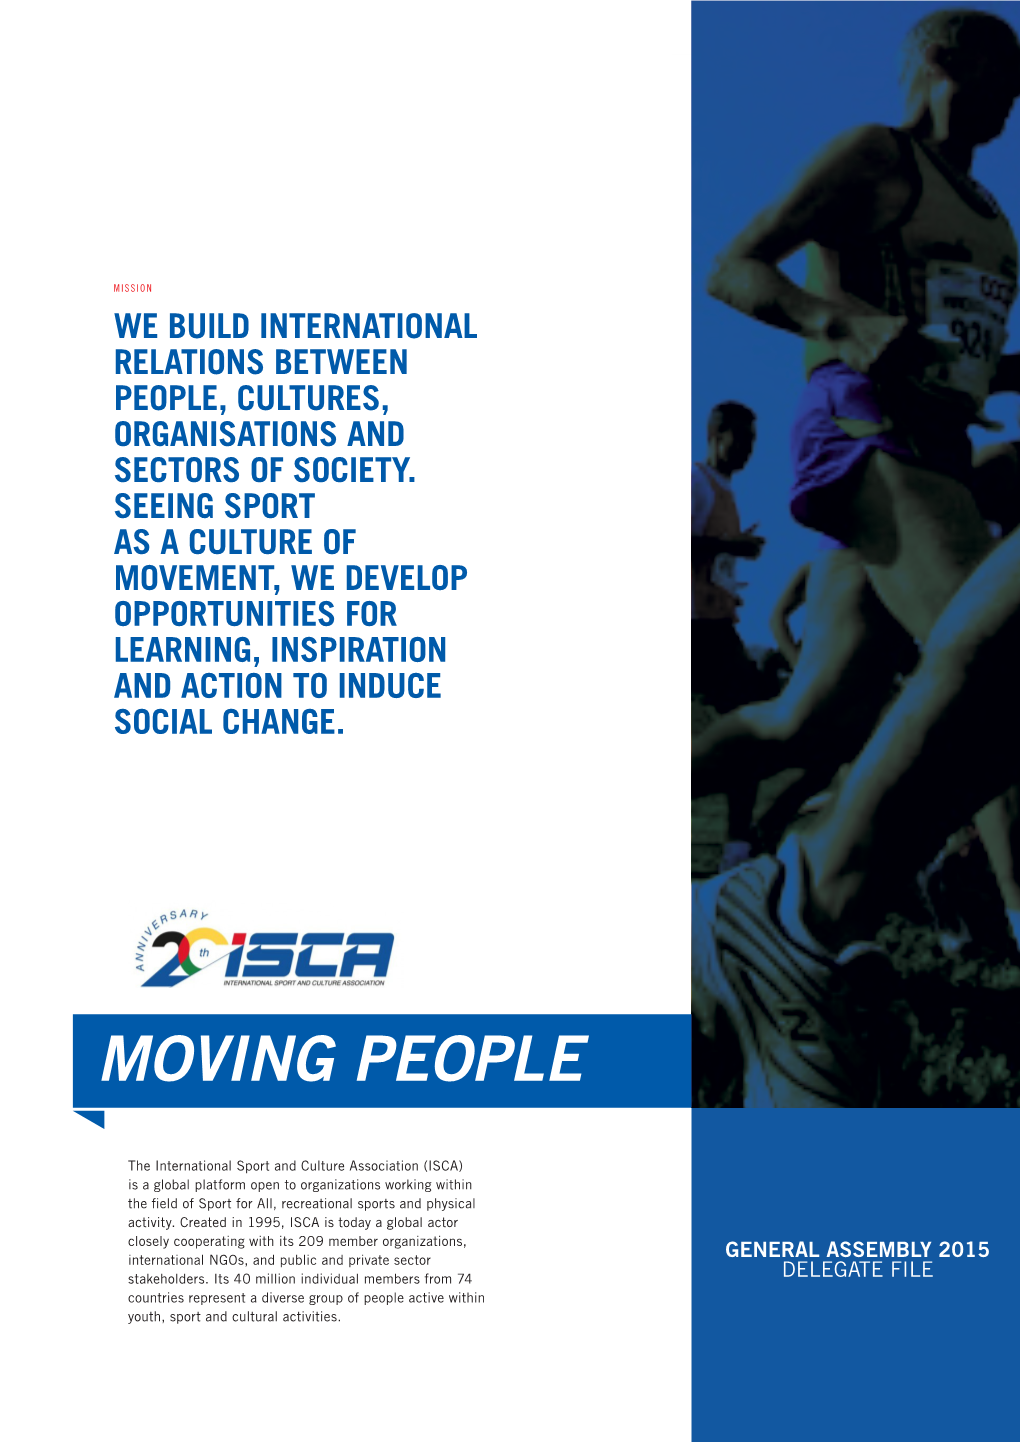 We Build International Relations Between People, Cultures, Organisations and Sectors of Society